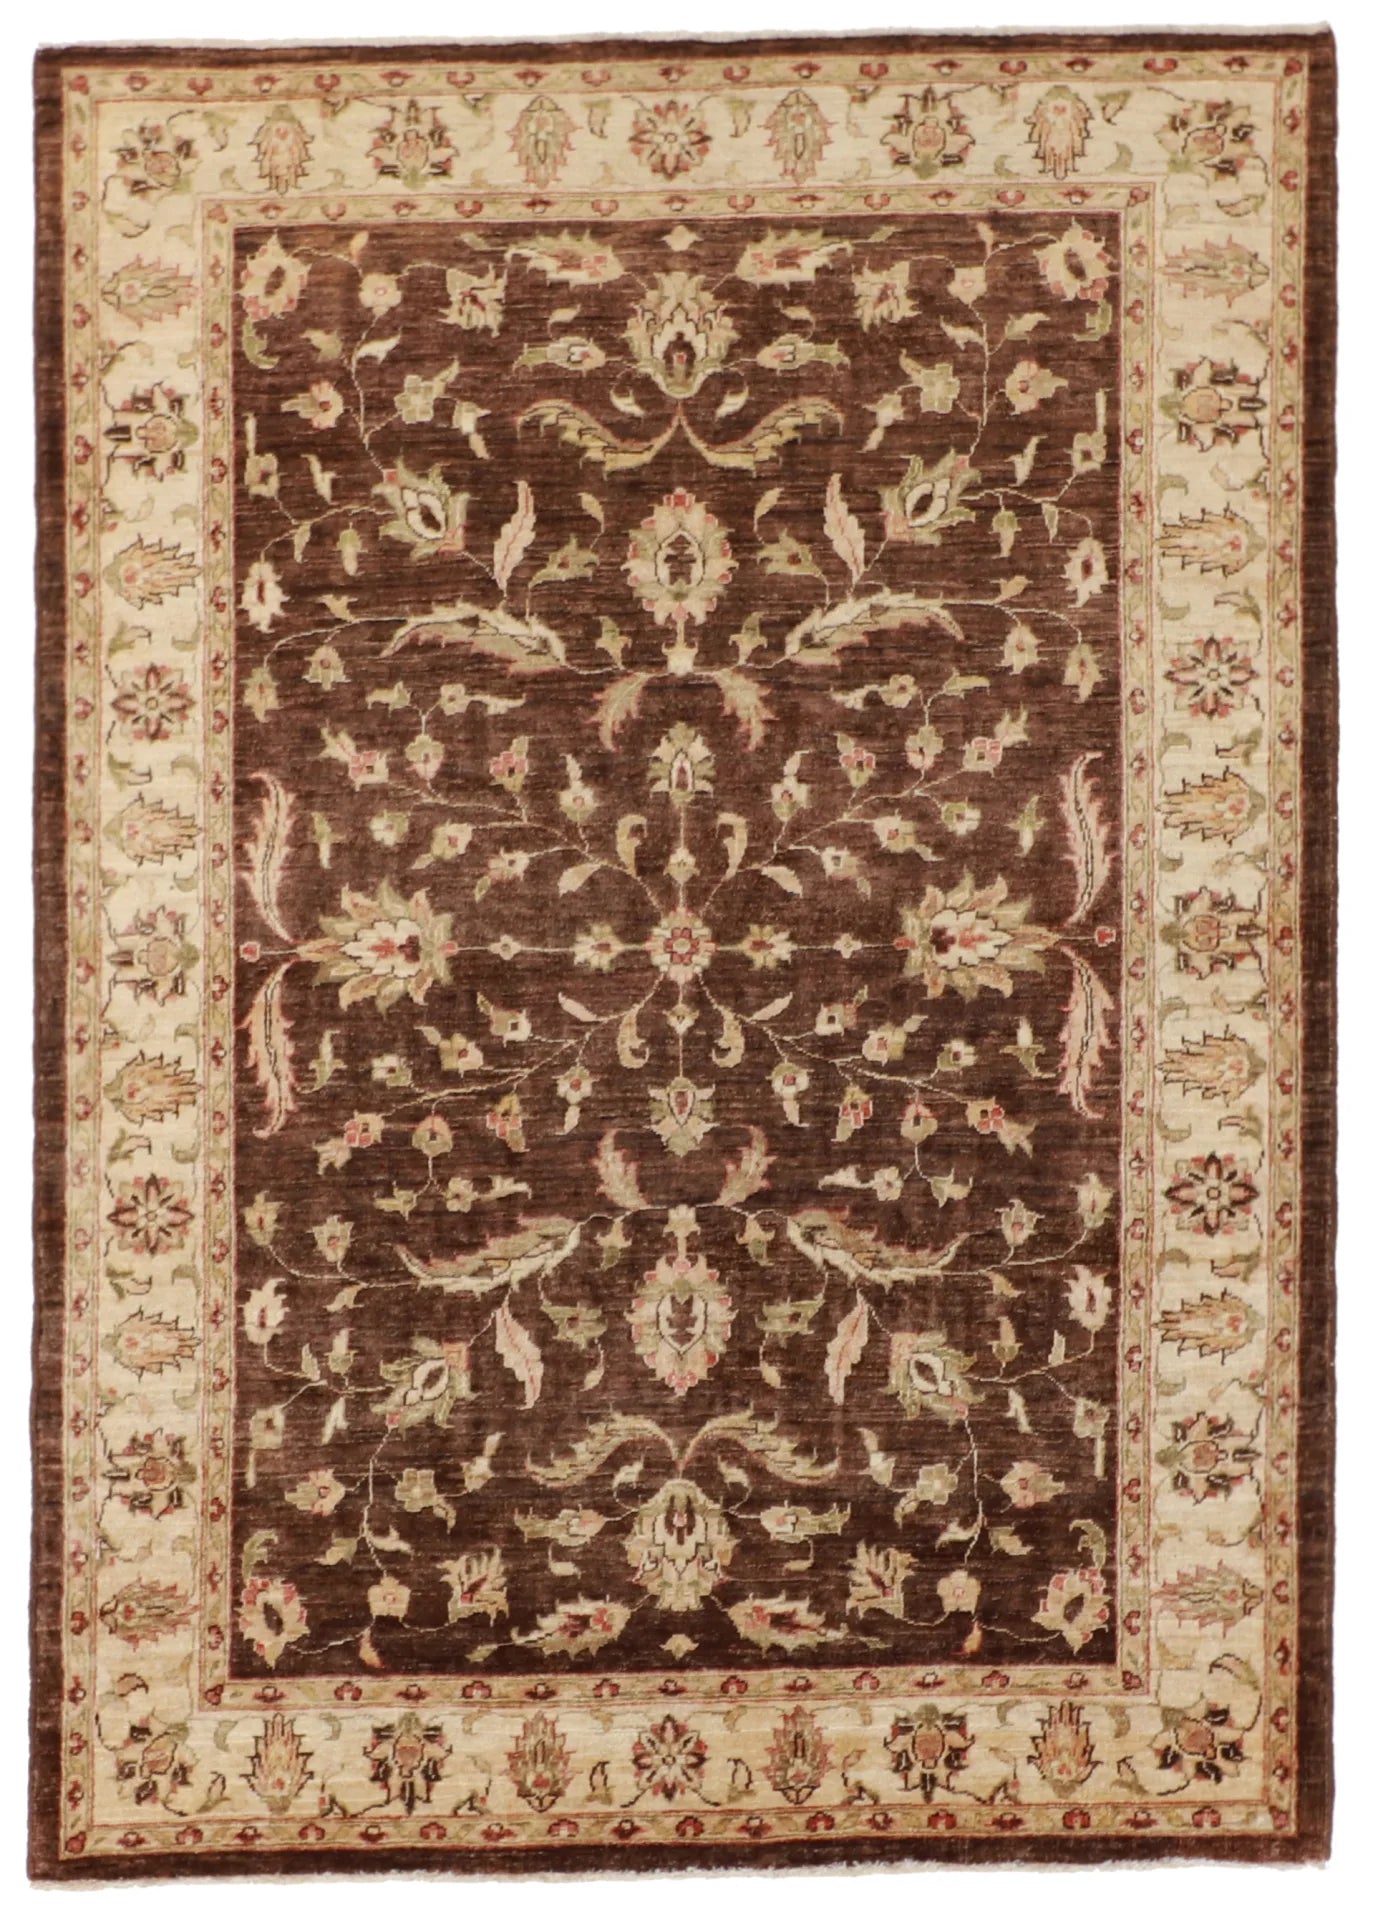 5x7 - Frahan Fine/Wool All Over Rectangle - Hand Knotted Rug